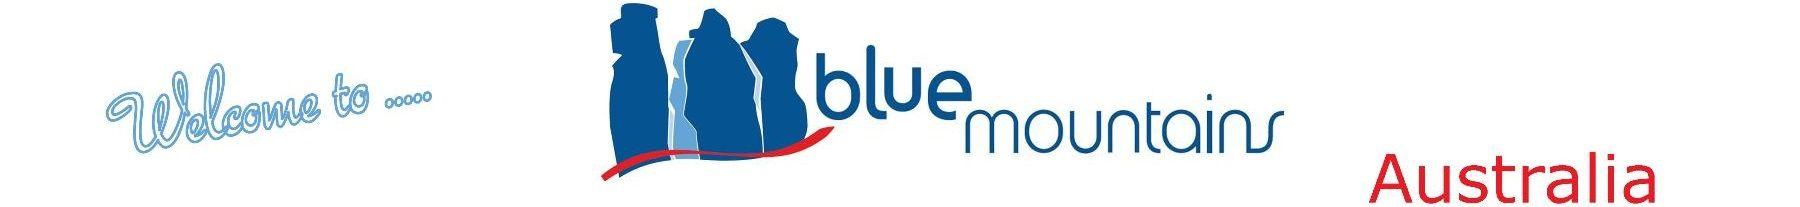 Pink and Blue Mountains Brand Logo - Your Complete Blue Mountains Guide. Visit the Blue Mountains